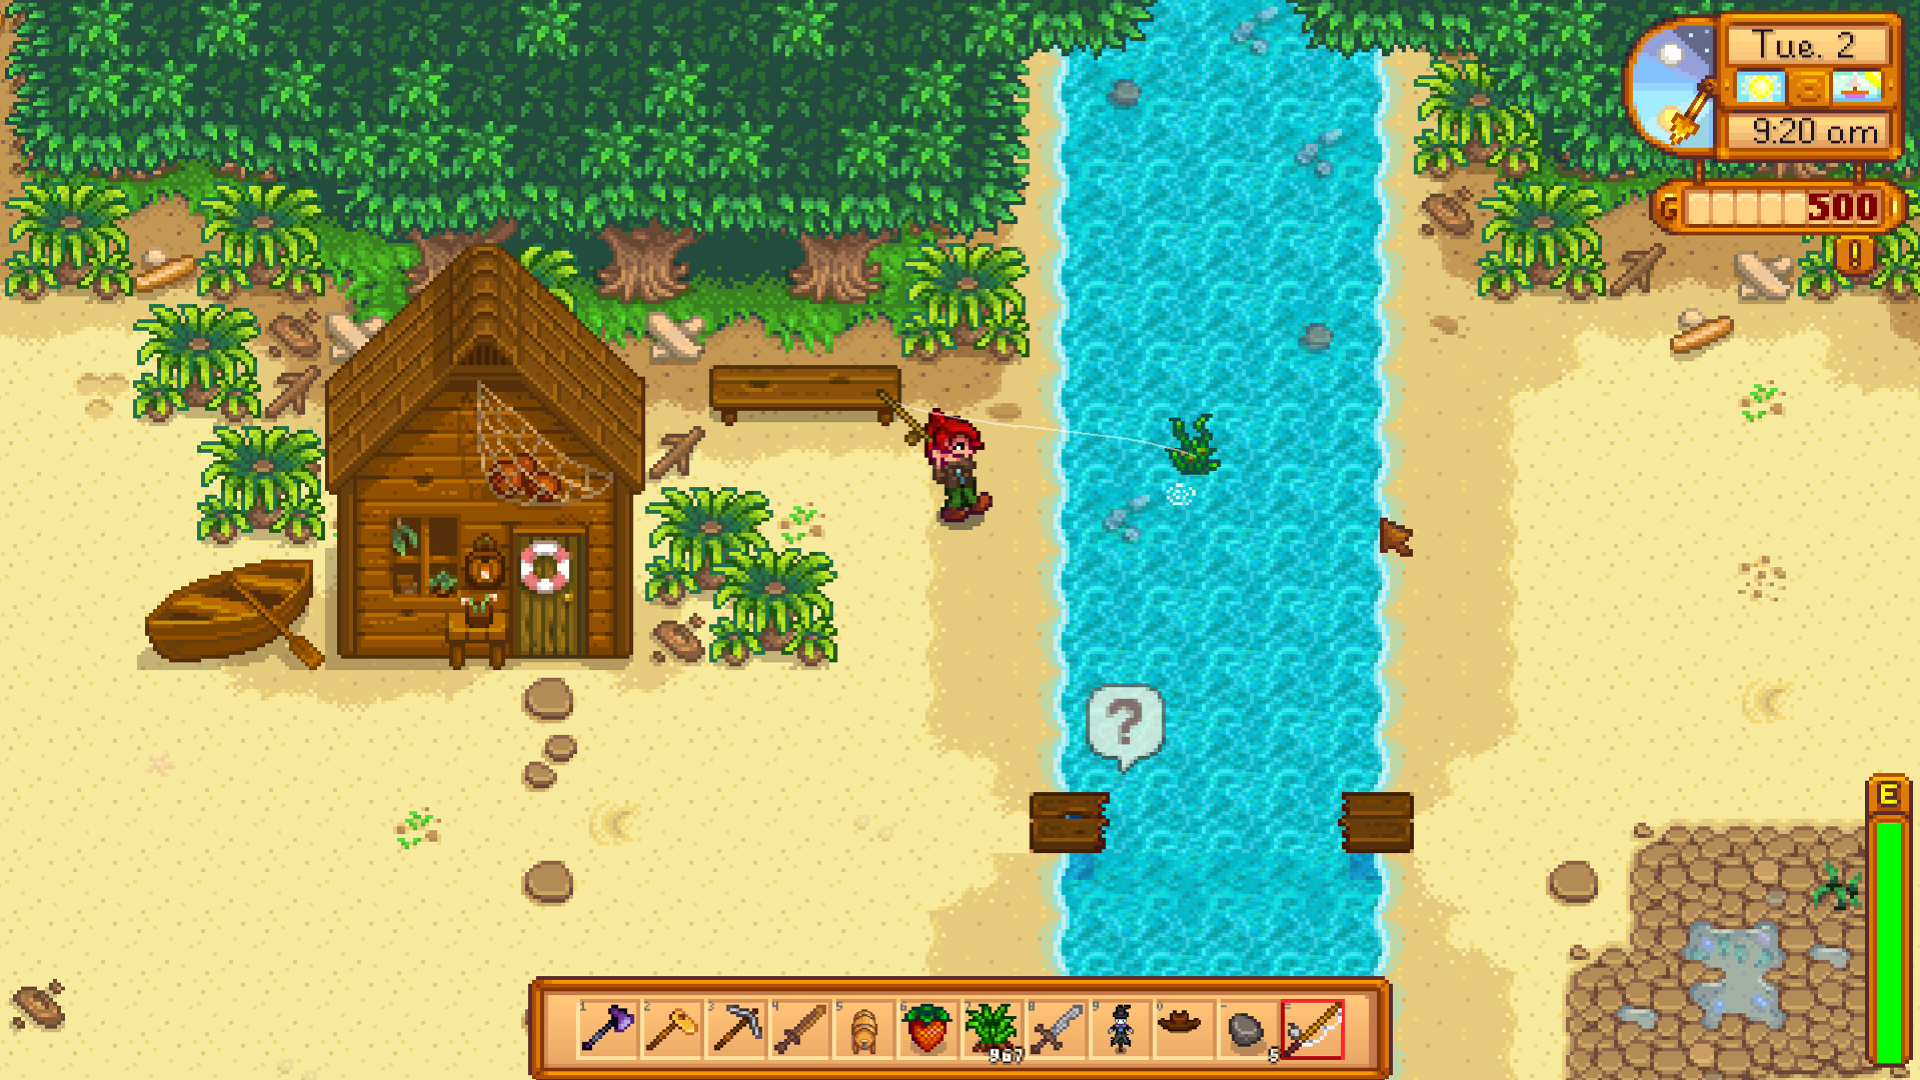 The Ups And Downs Of Stardew Valley On Switch - Game Informer